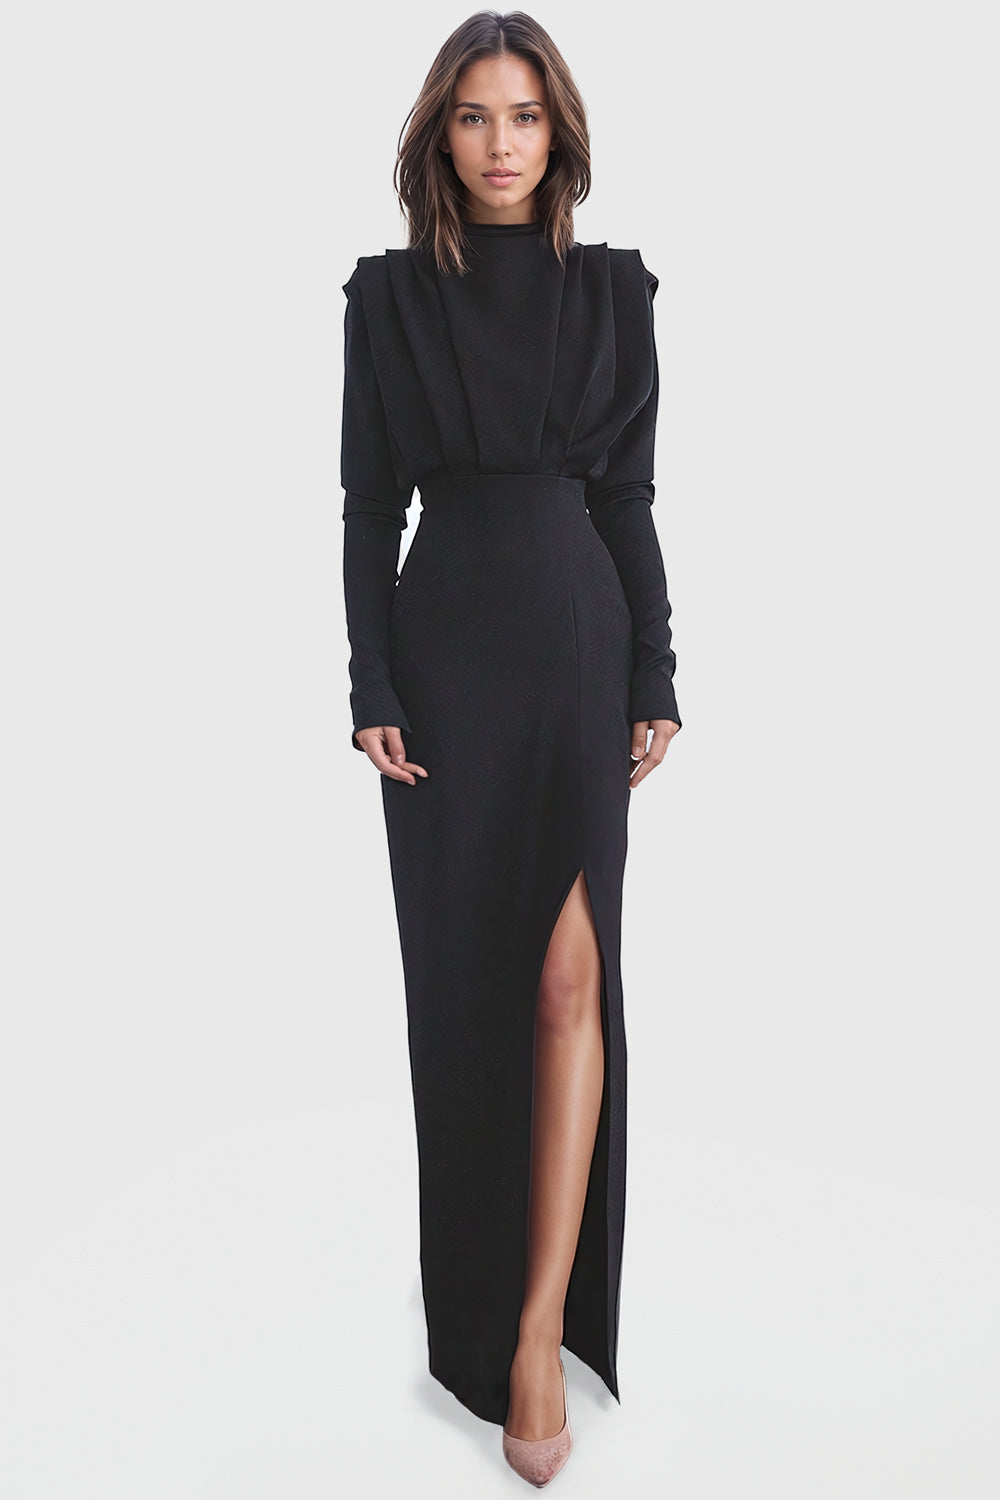 Sophisticated Long-Sleeve Maxi Dress with High Slit - Black